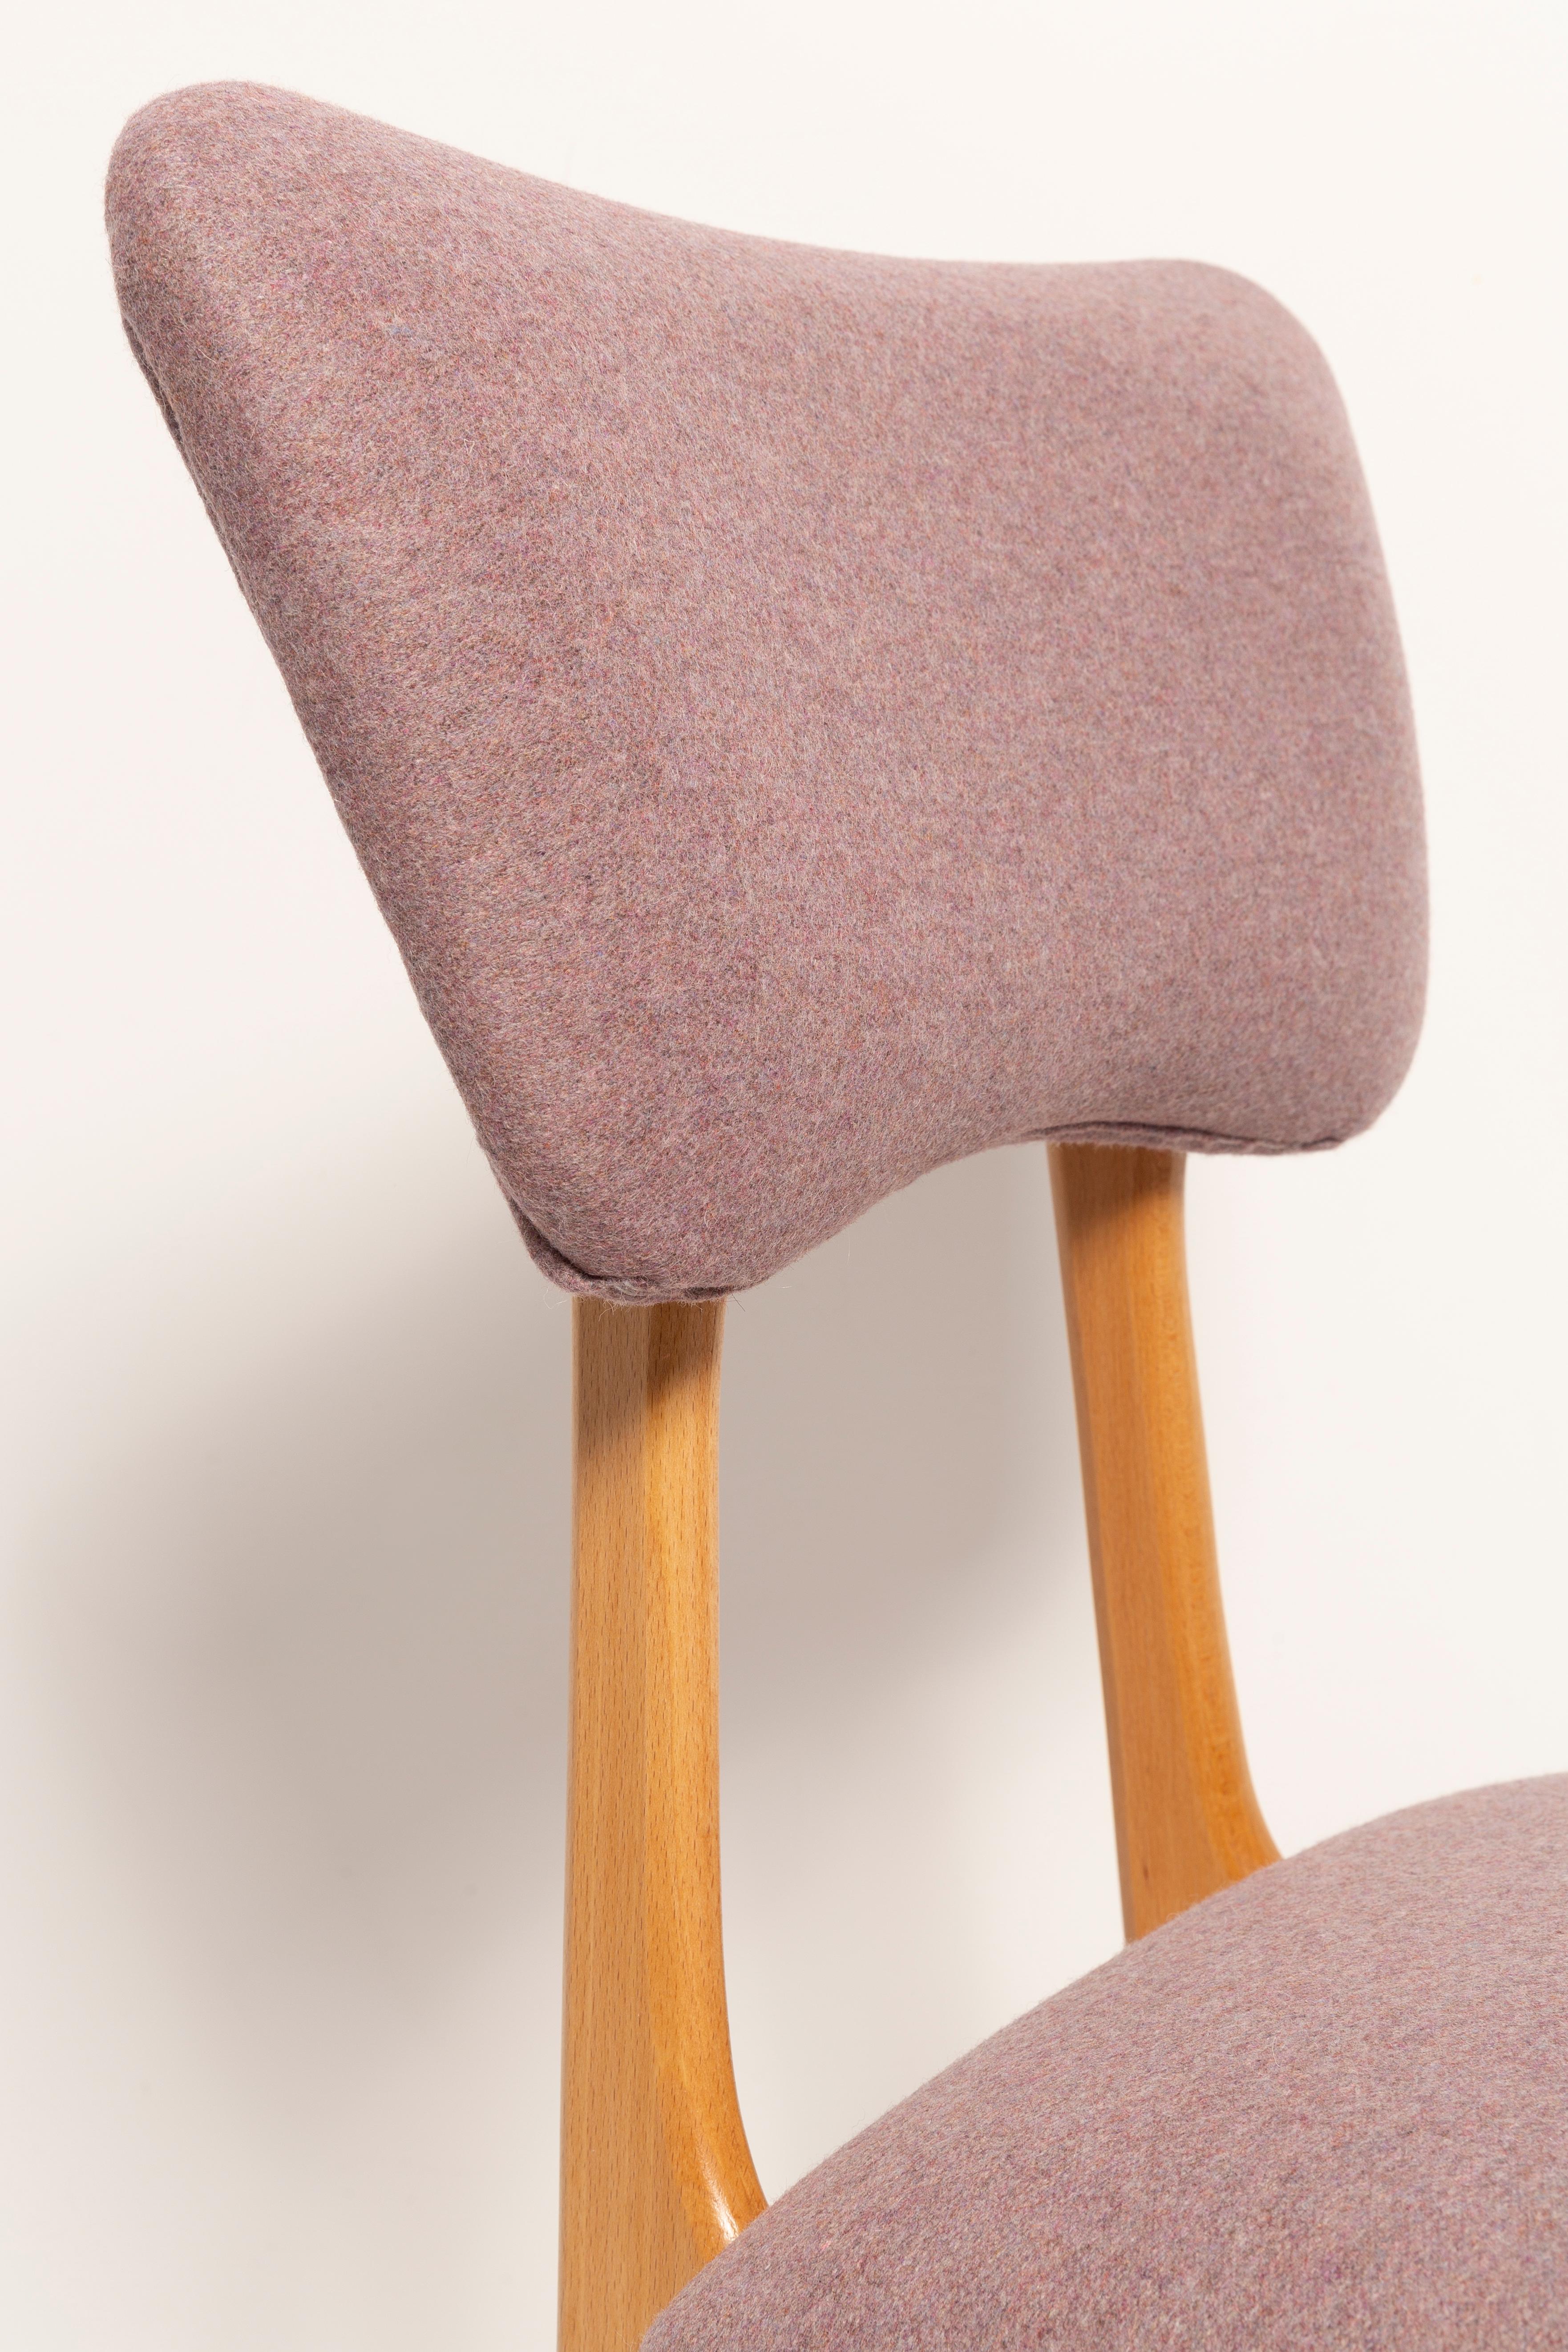 20th Century Butterfly Dining Chair, Pink Wool, Light Wood, Europe, 1960s For Sale 5